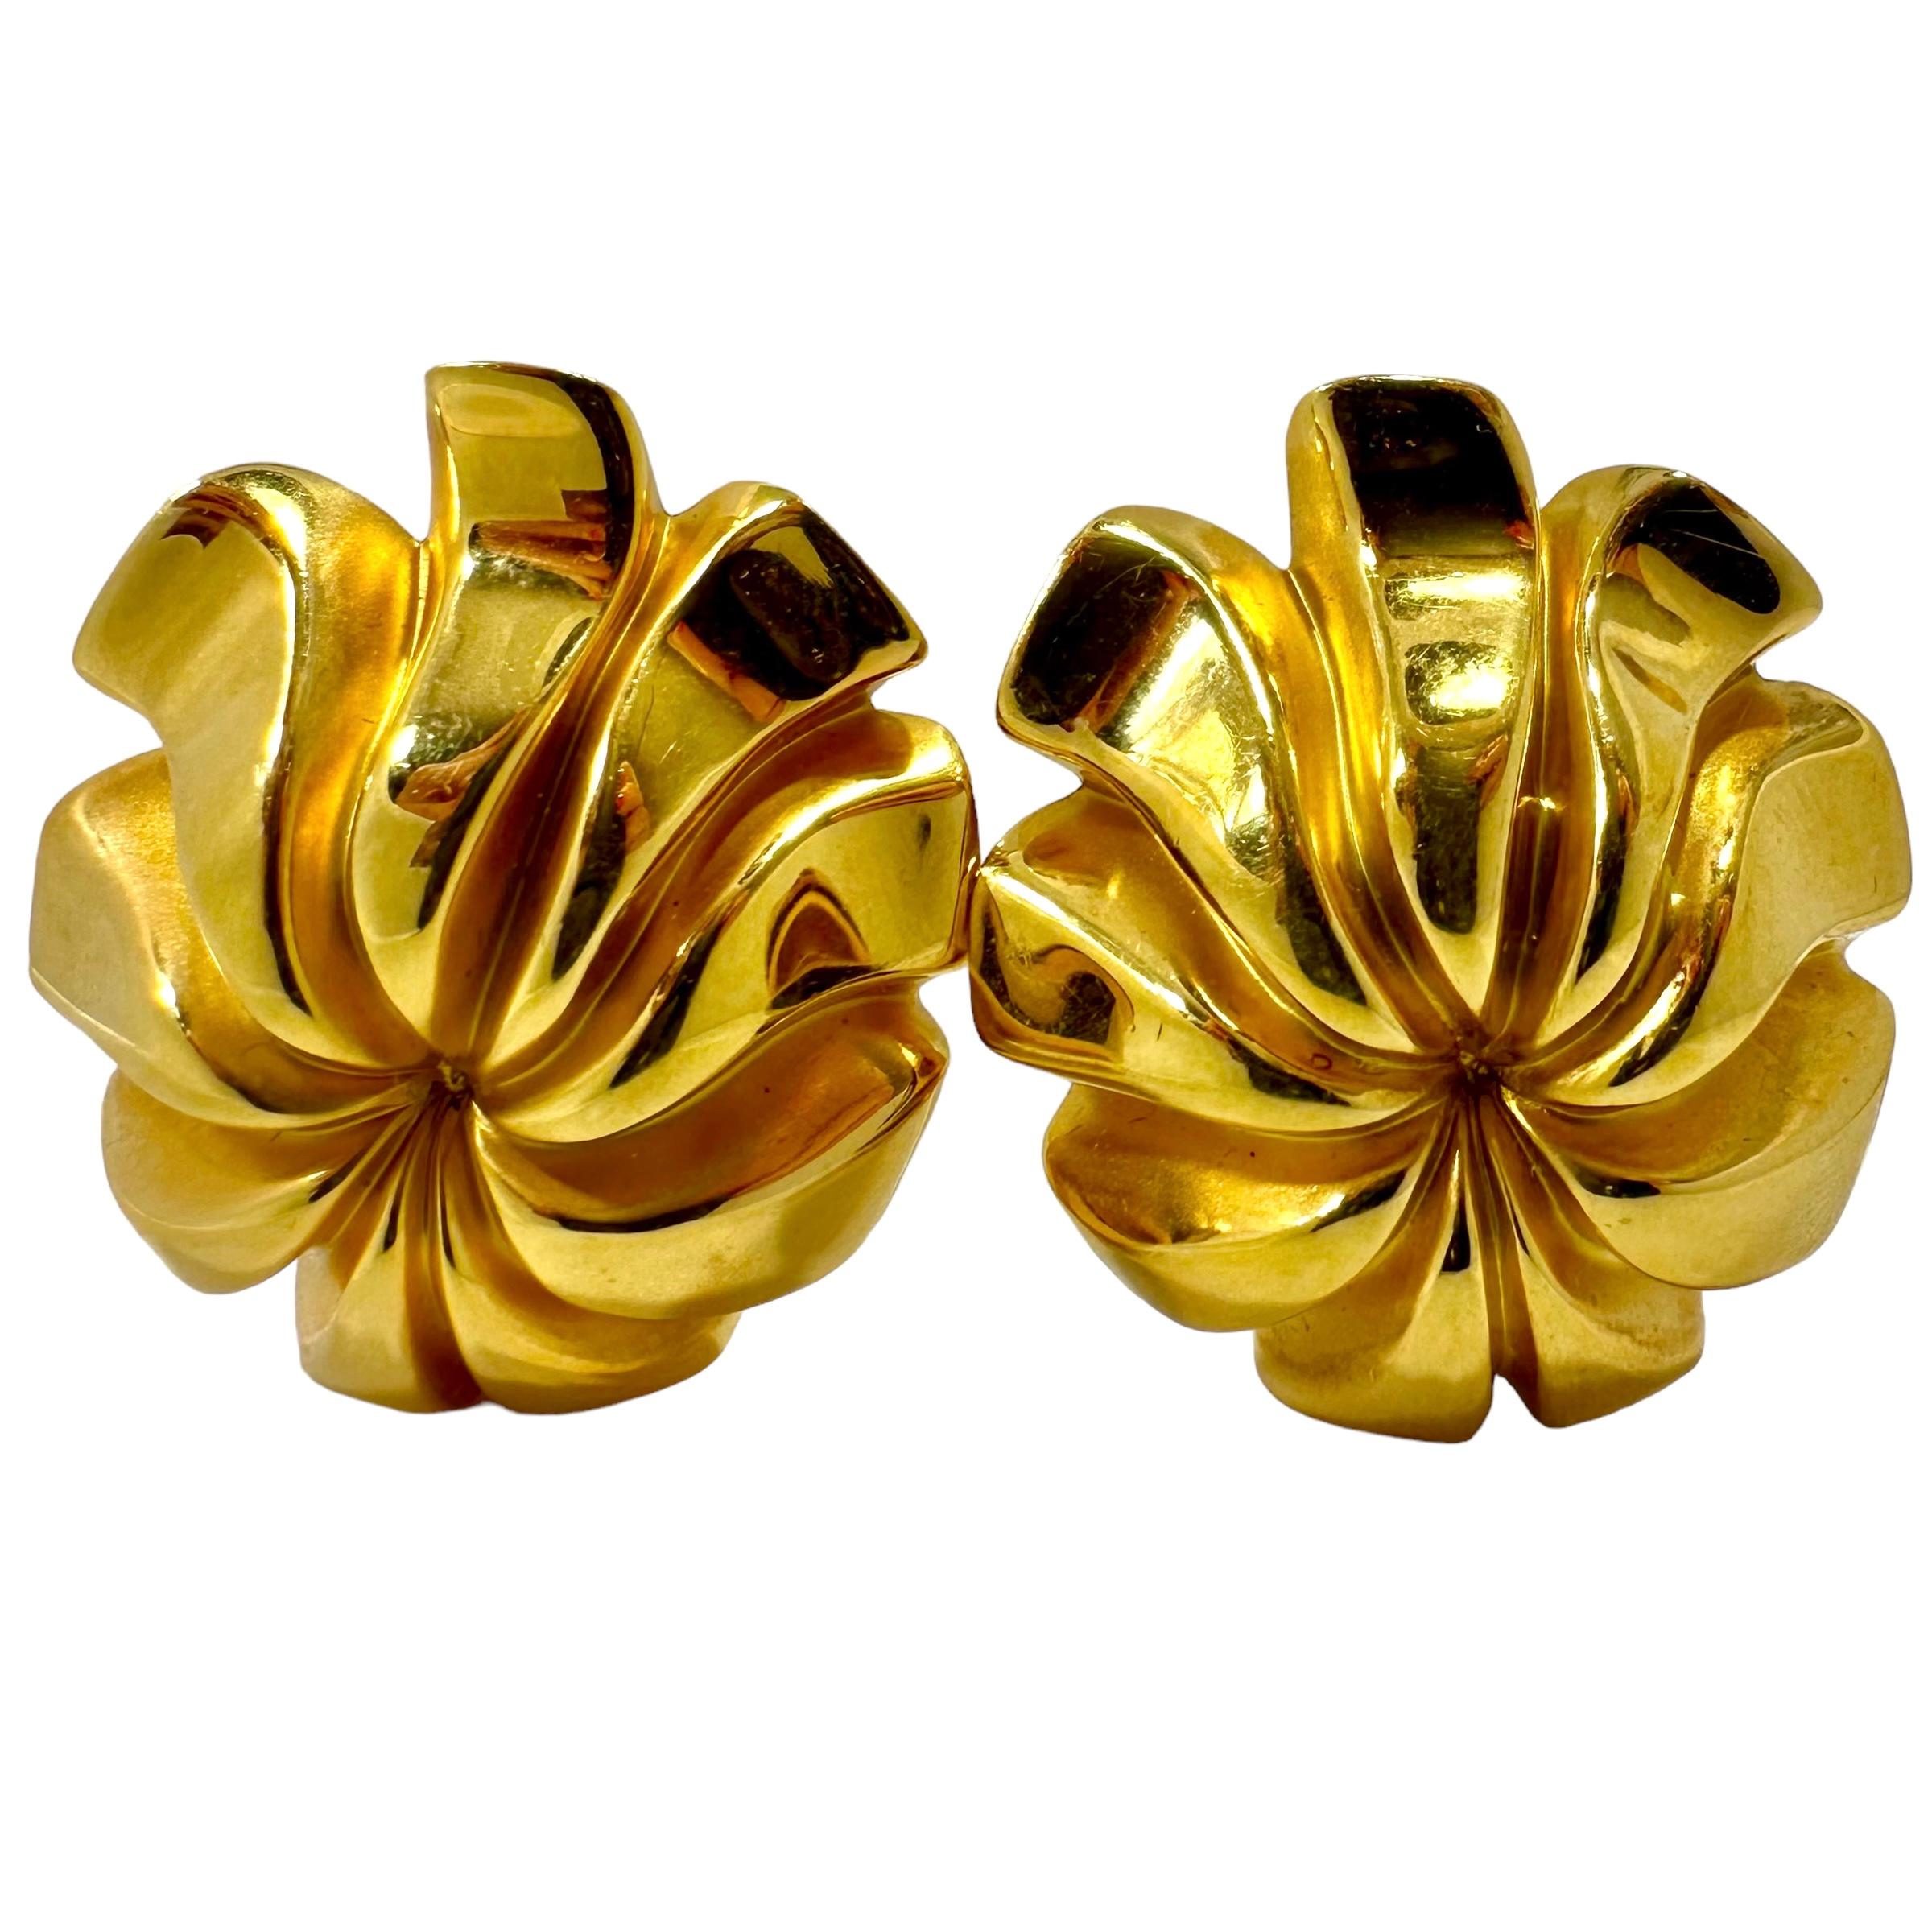 This outstanding pair of 18k yellow gold Tiffany & Co. earrings epitomize Tiffany style and quality with a modernist flair. Each measures 1 5/16 inches by 1 1/16 inches, and rises 1/2 inch above the ear, at the apex. Nine stylized petals on each are